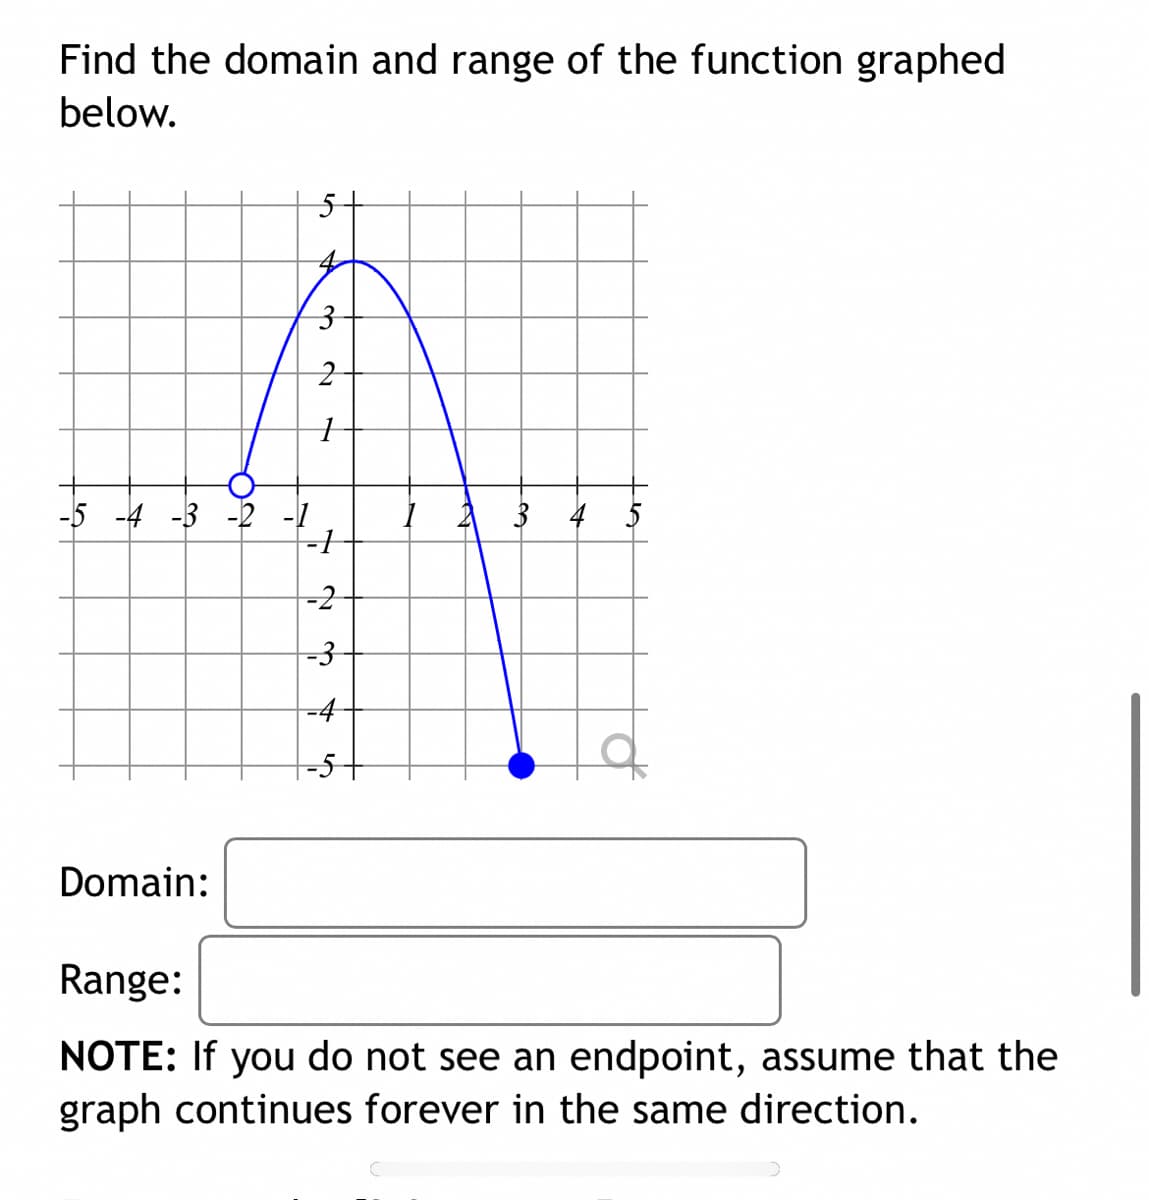 Find the domain and range of the function graphed
below.
-5 -4 -3 -2 -1
4 5
-2
=3
-4
-5-
Domain:
Range:
NOTE: If you do not see an endpoint, assume that the
graph continues forever in the same direction.
